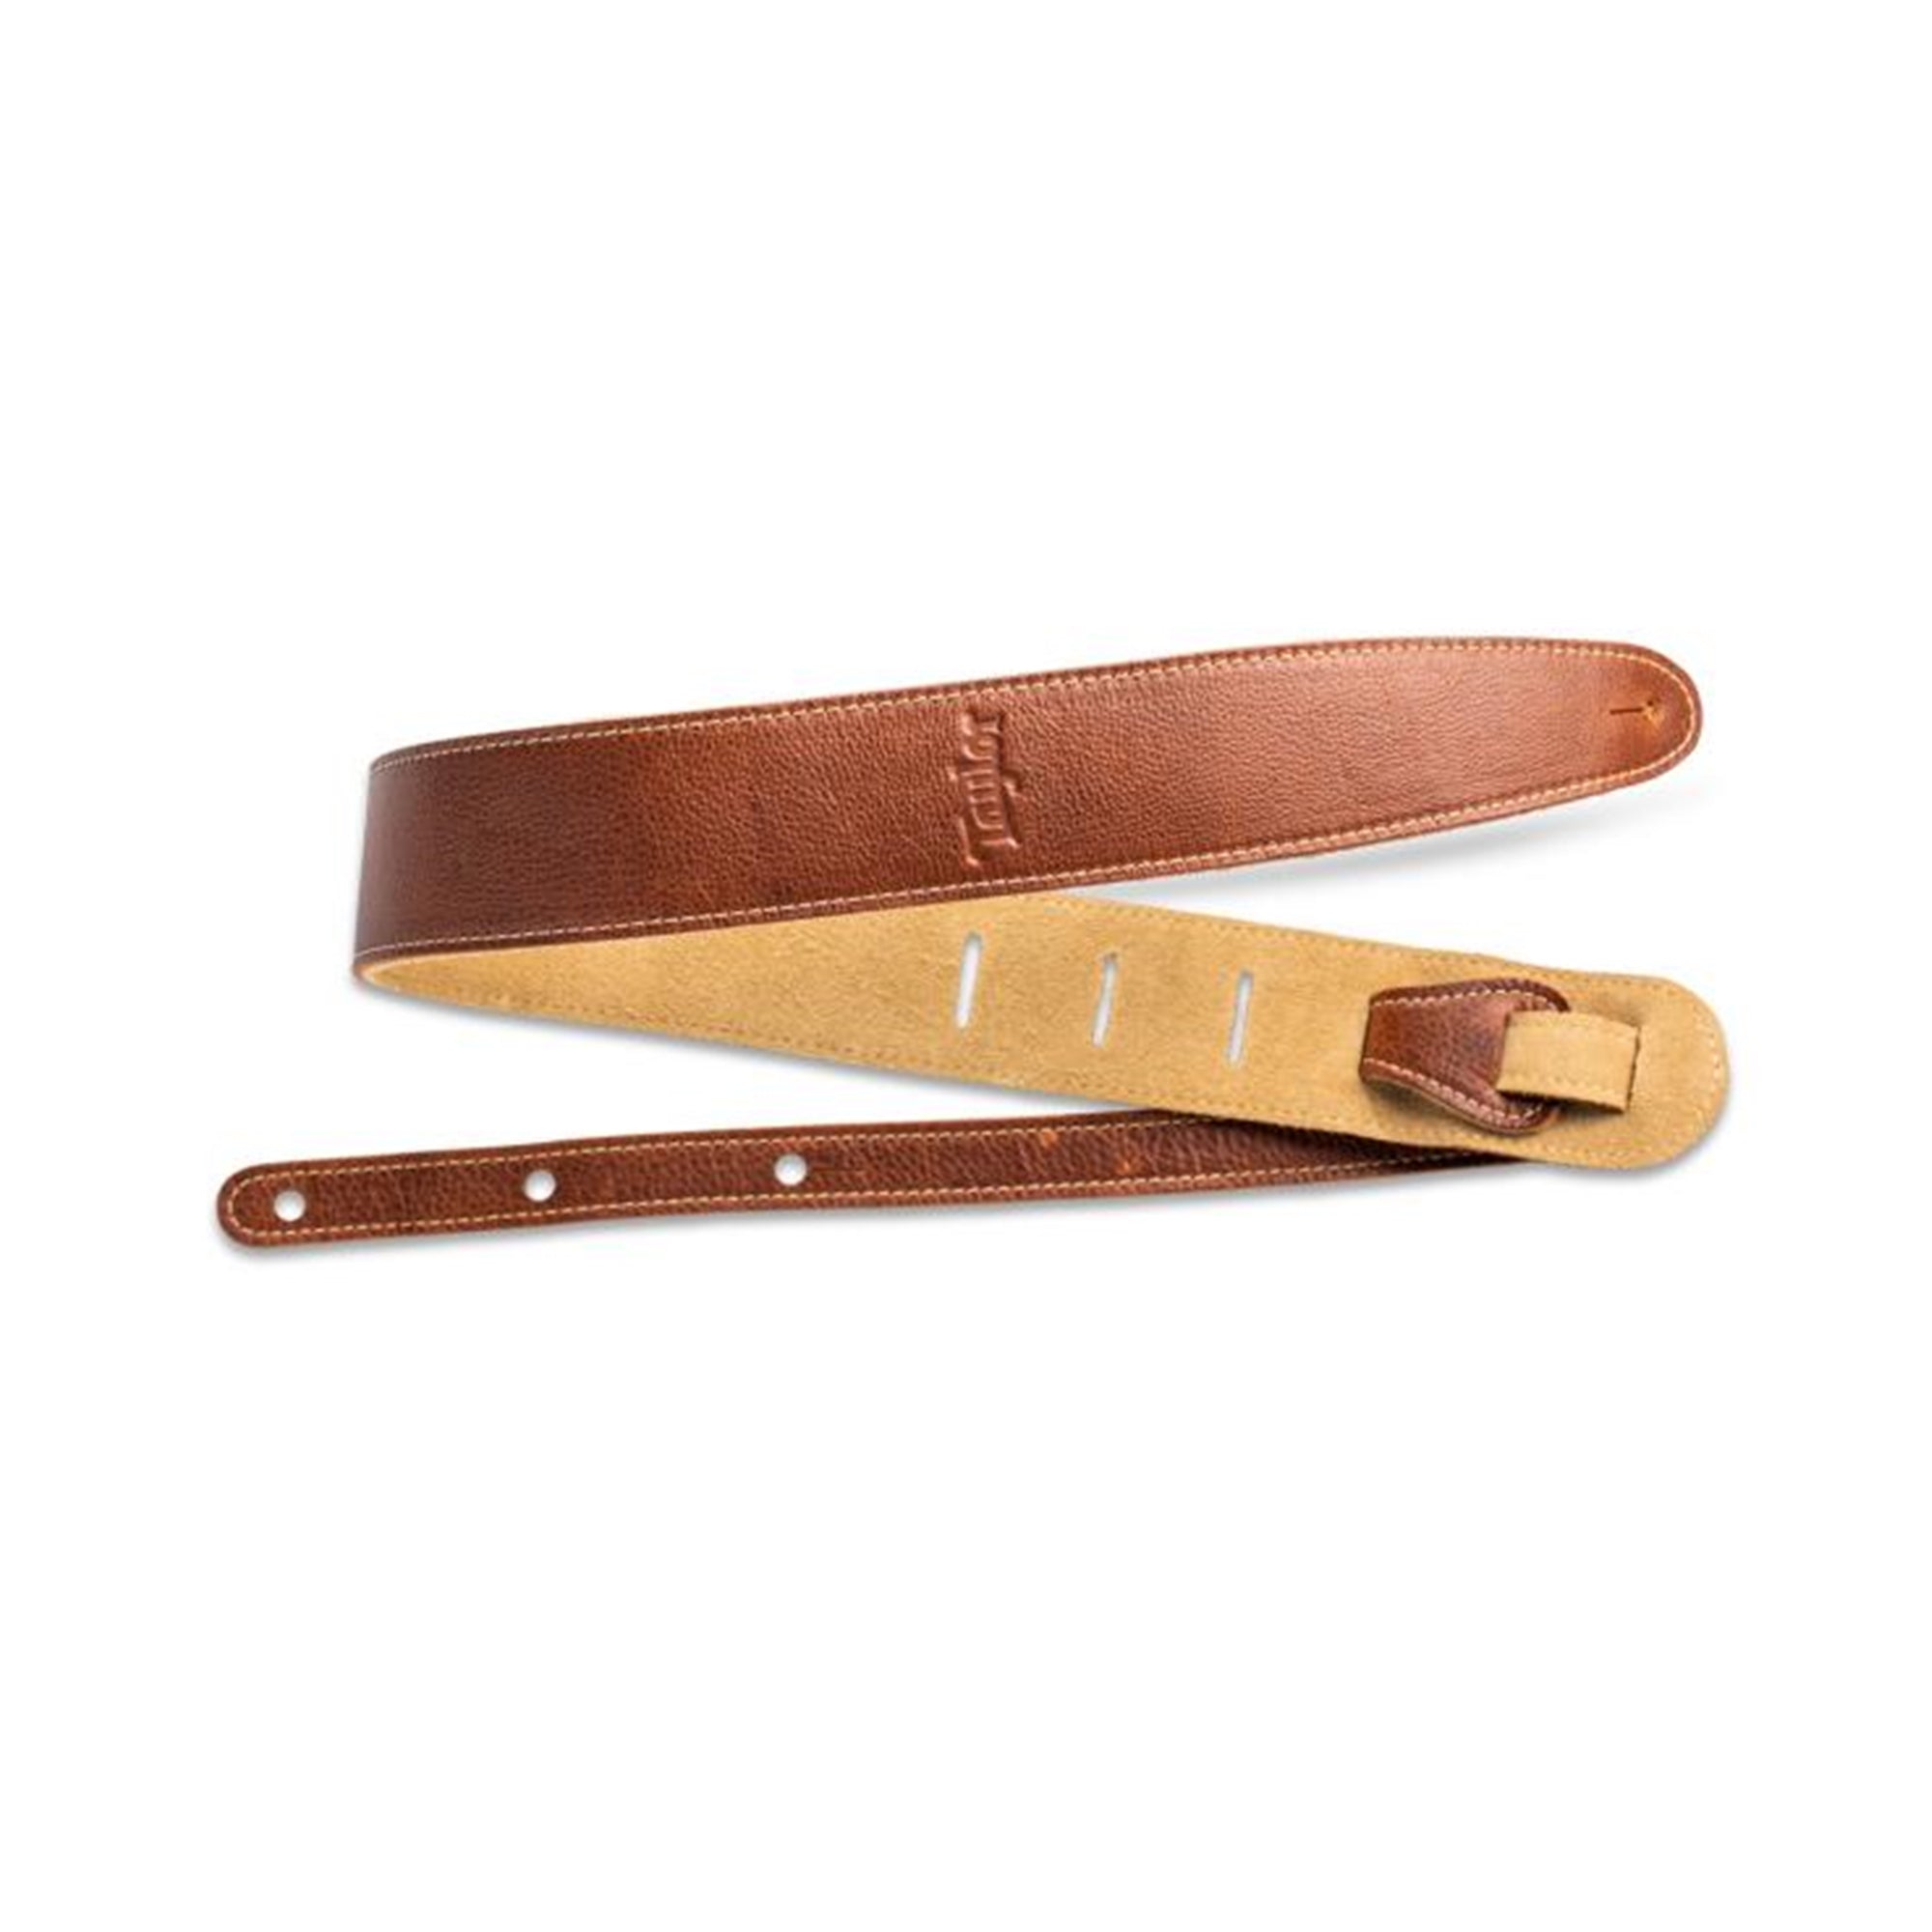 Taylor 410125 2.5"  Leather/Suede Guitar Strap, Chocolate Brown